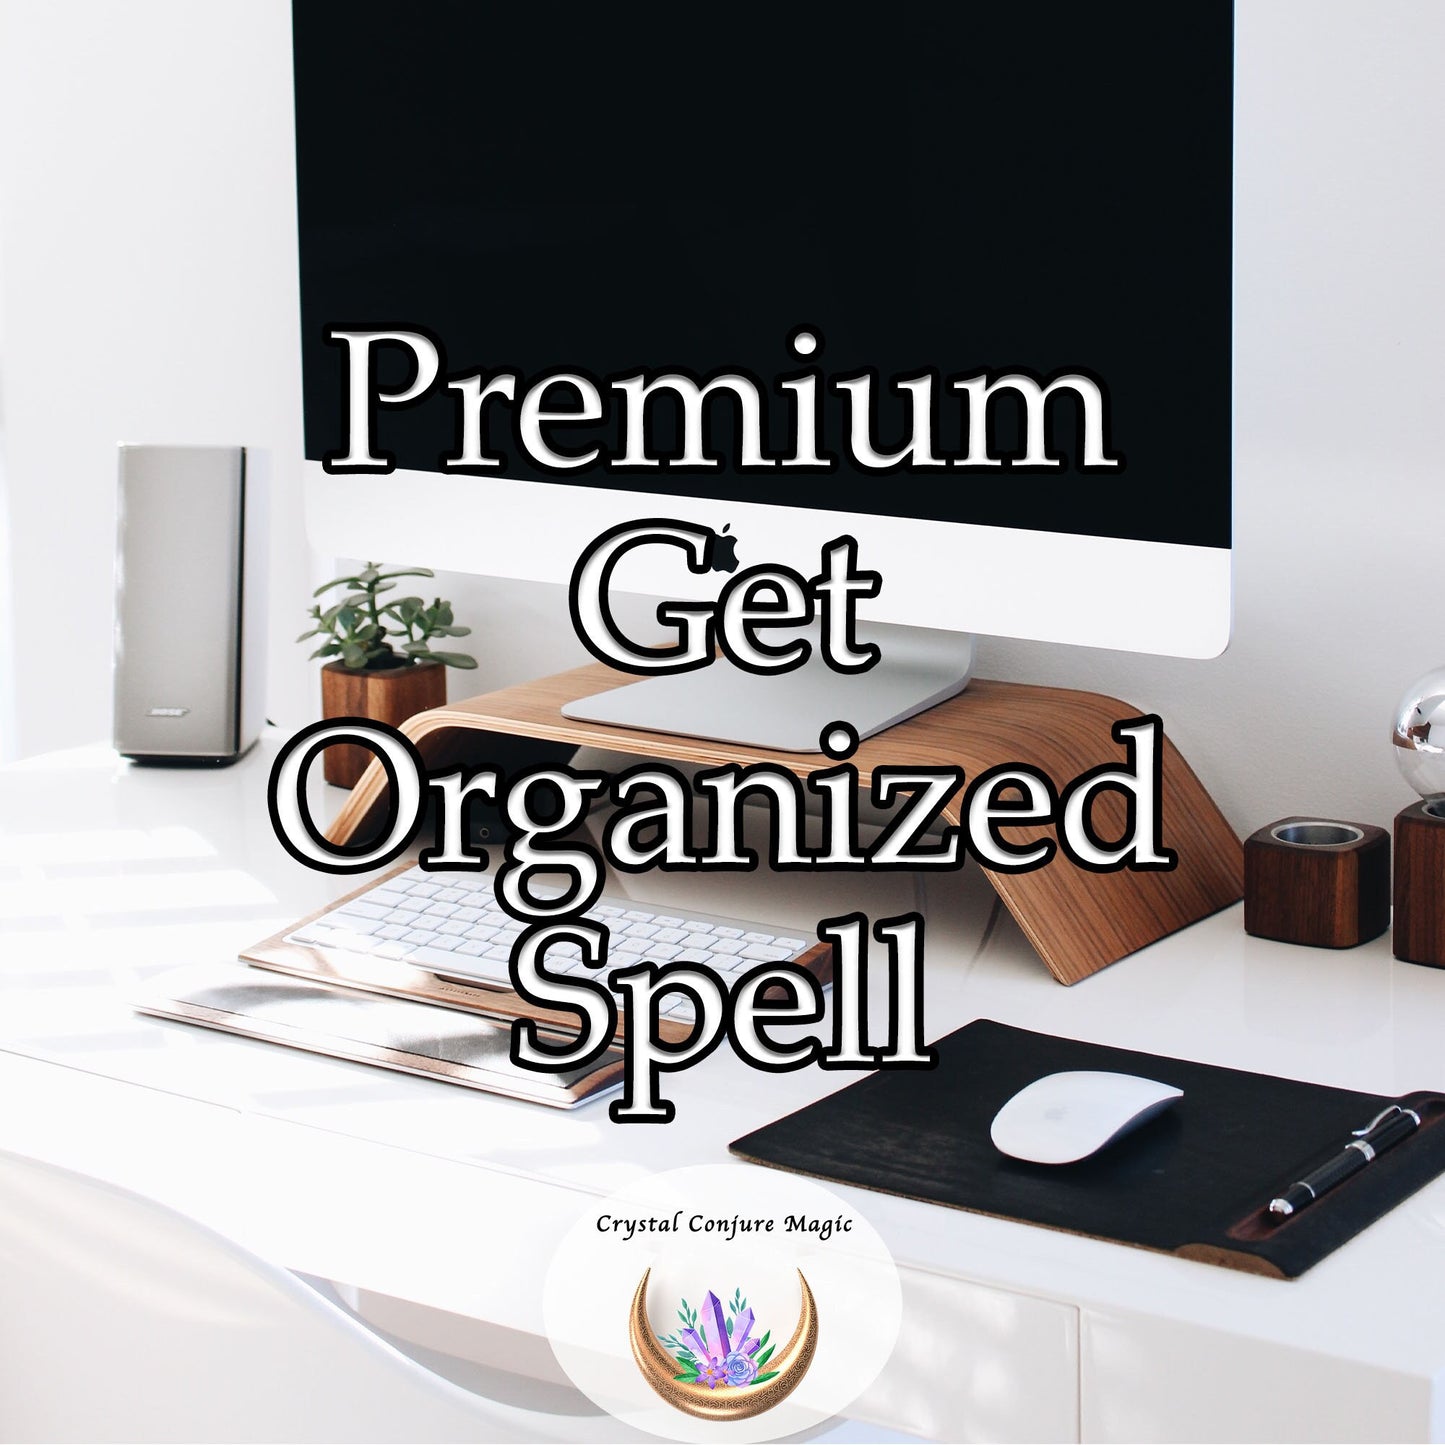 Premium Get Organized Spell - unlock a clutter-free life filled with peace and serenity